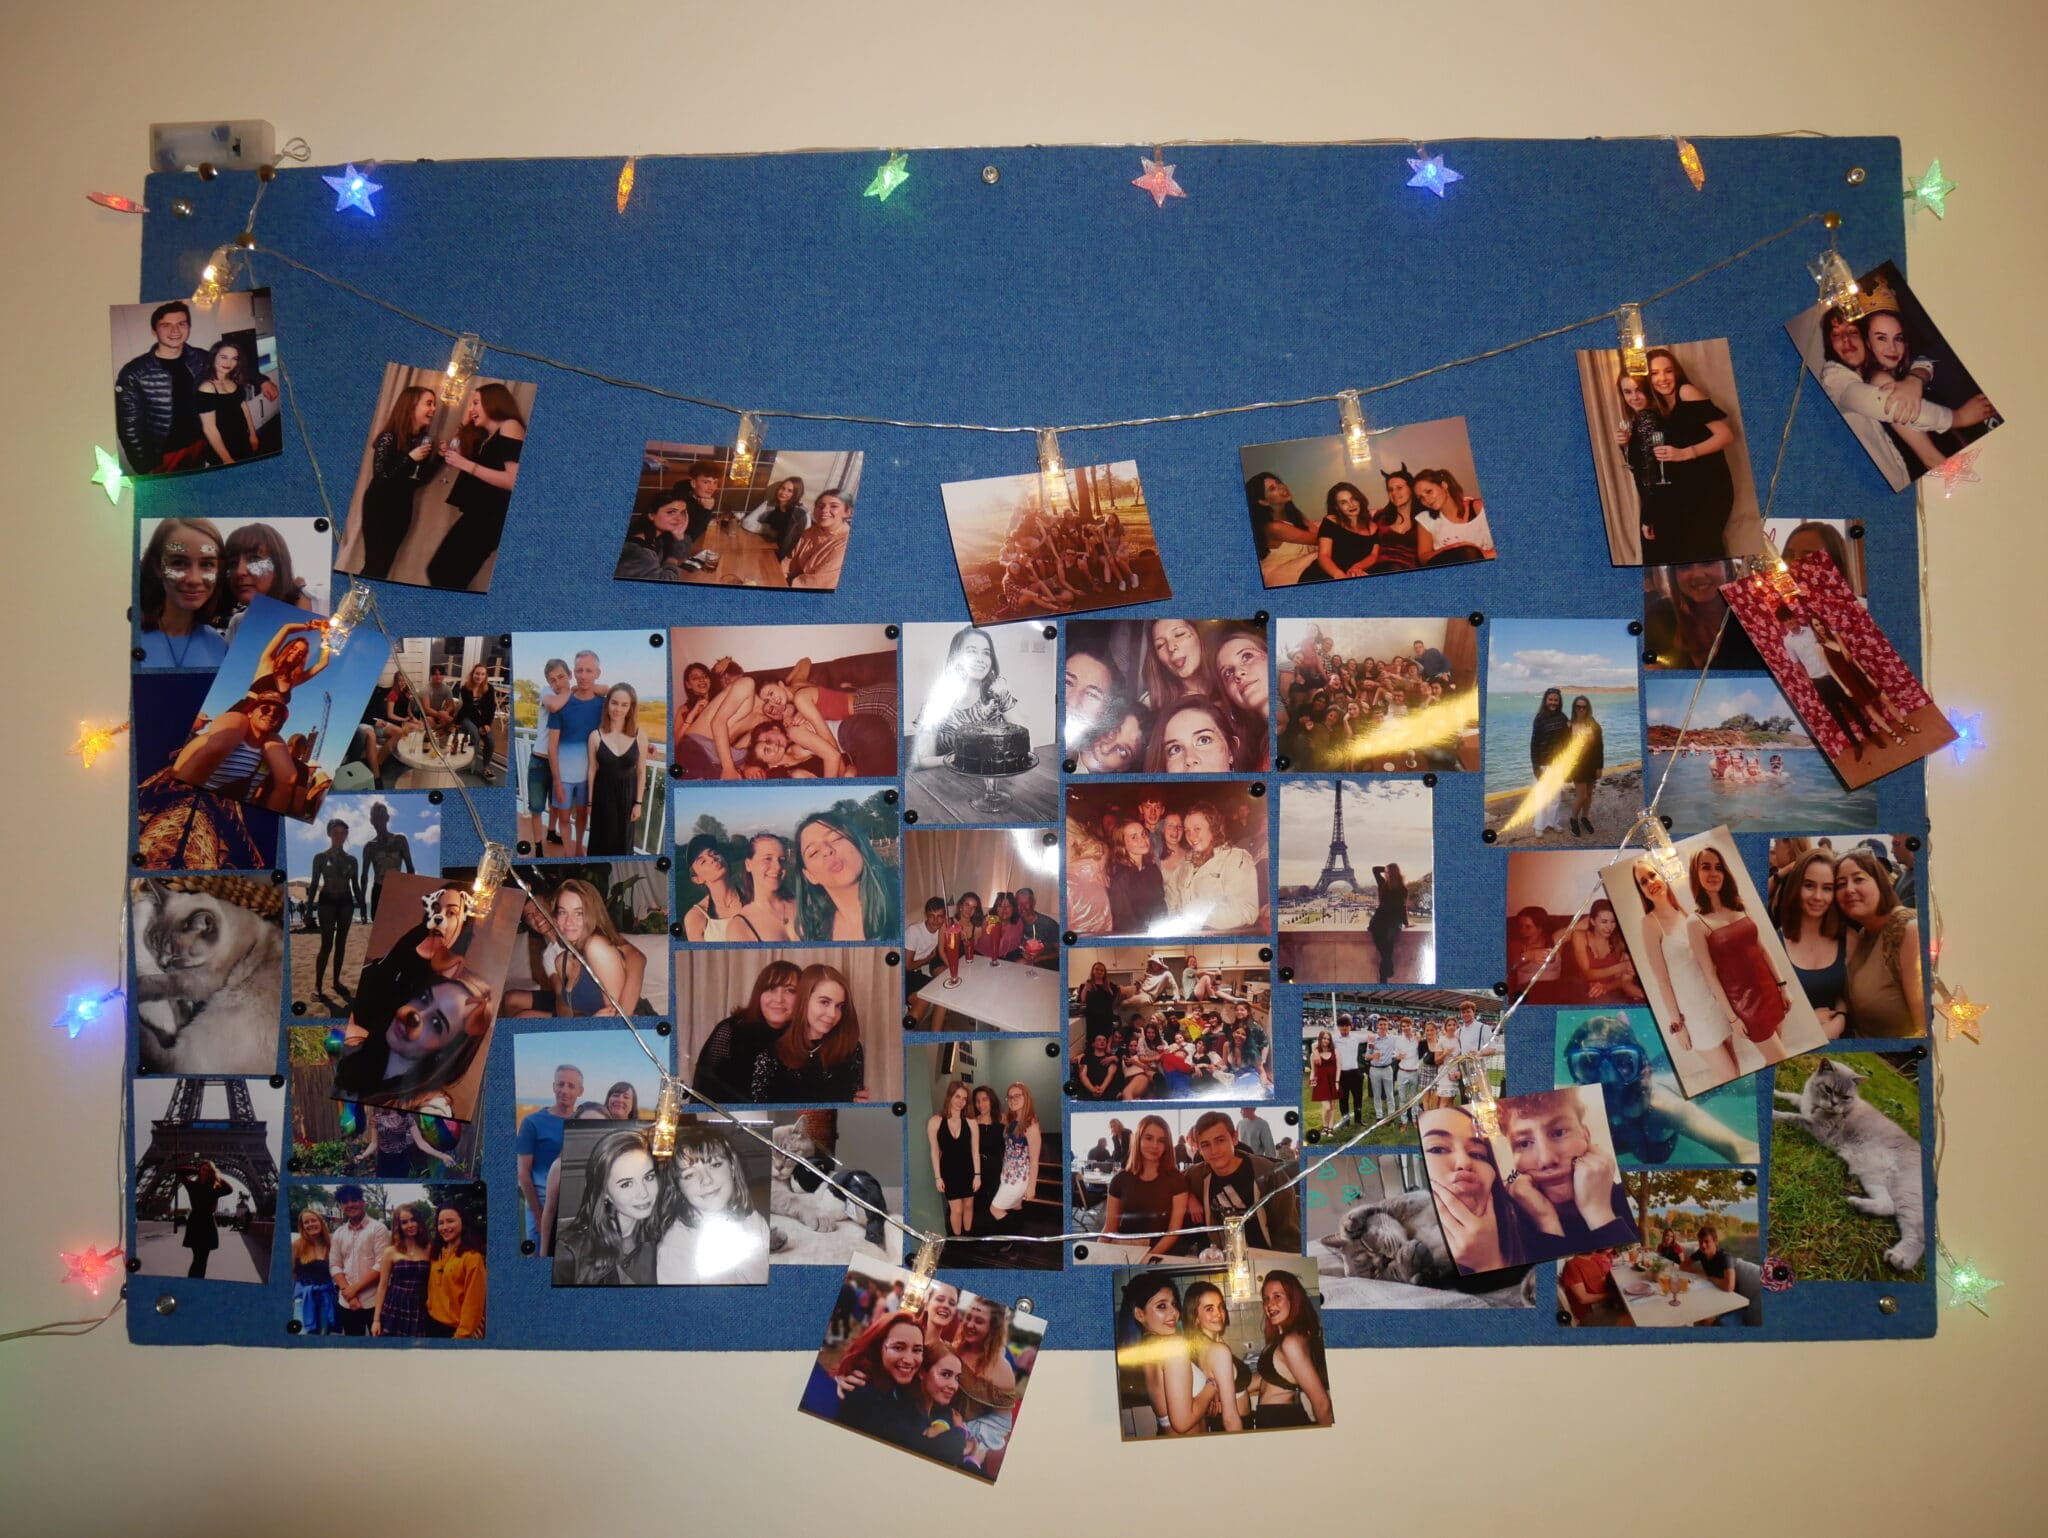 Print photos of friends and family to decorate your room with